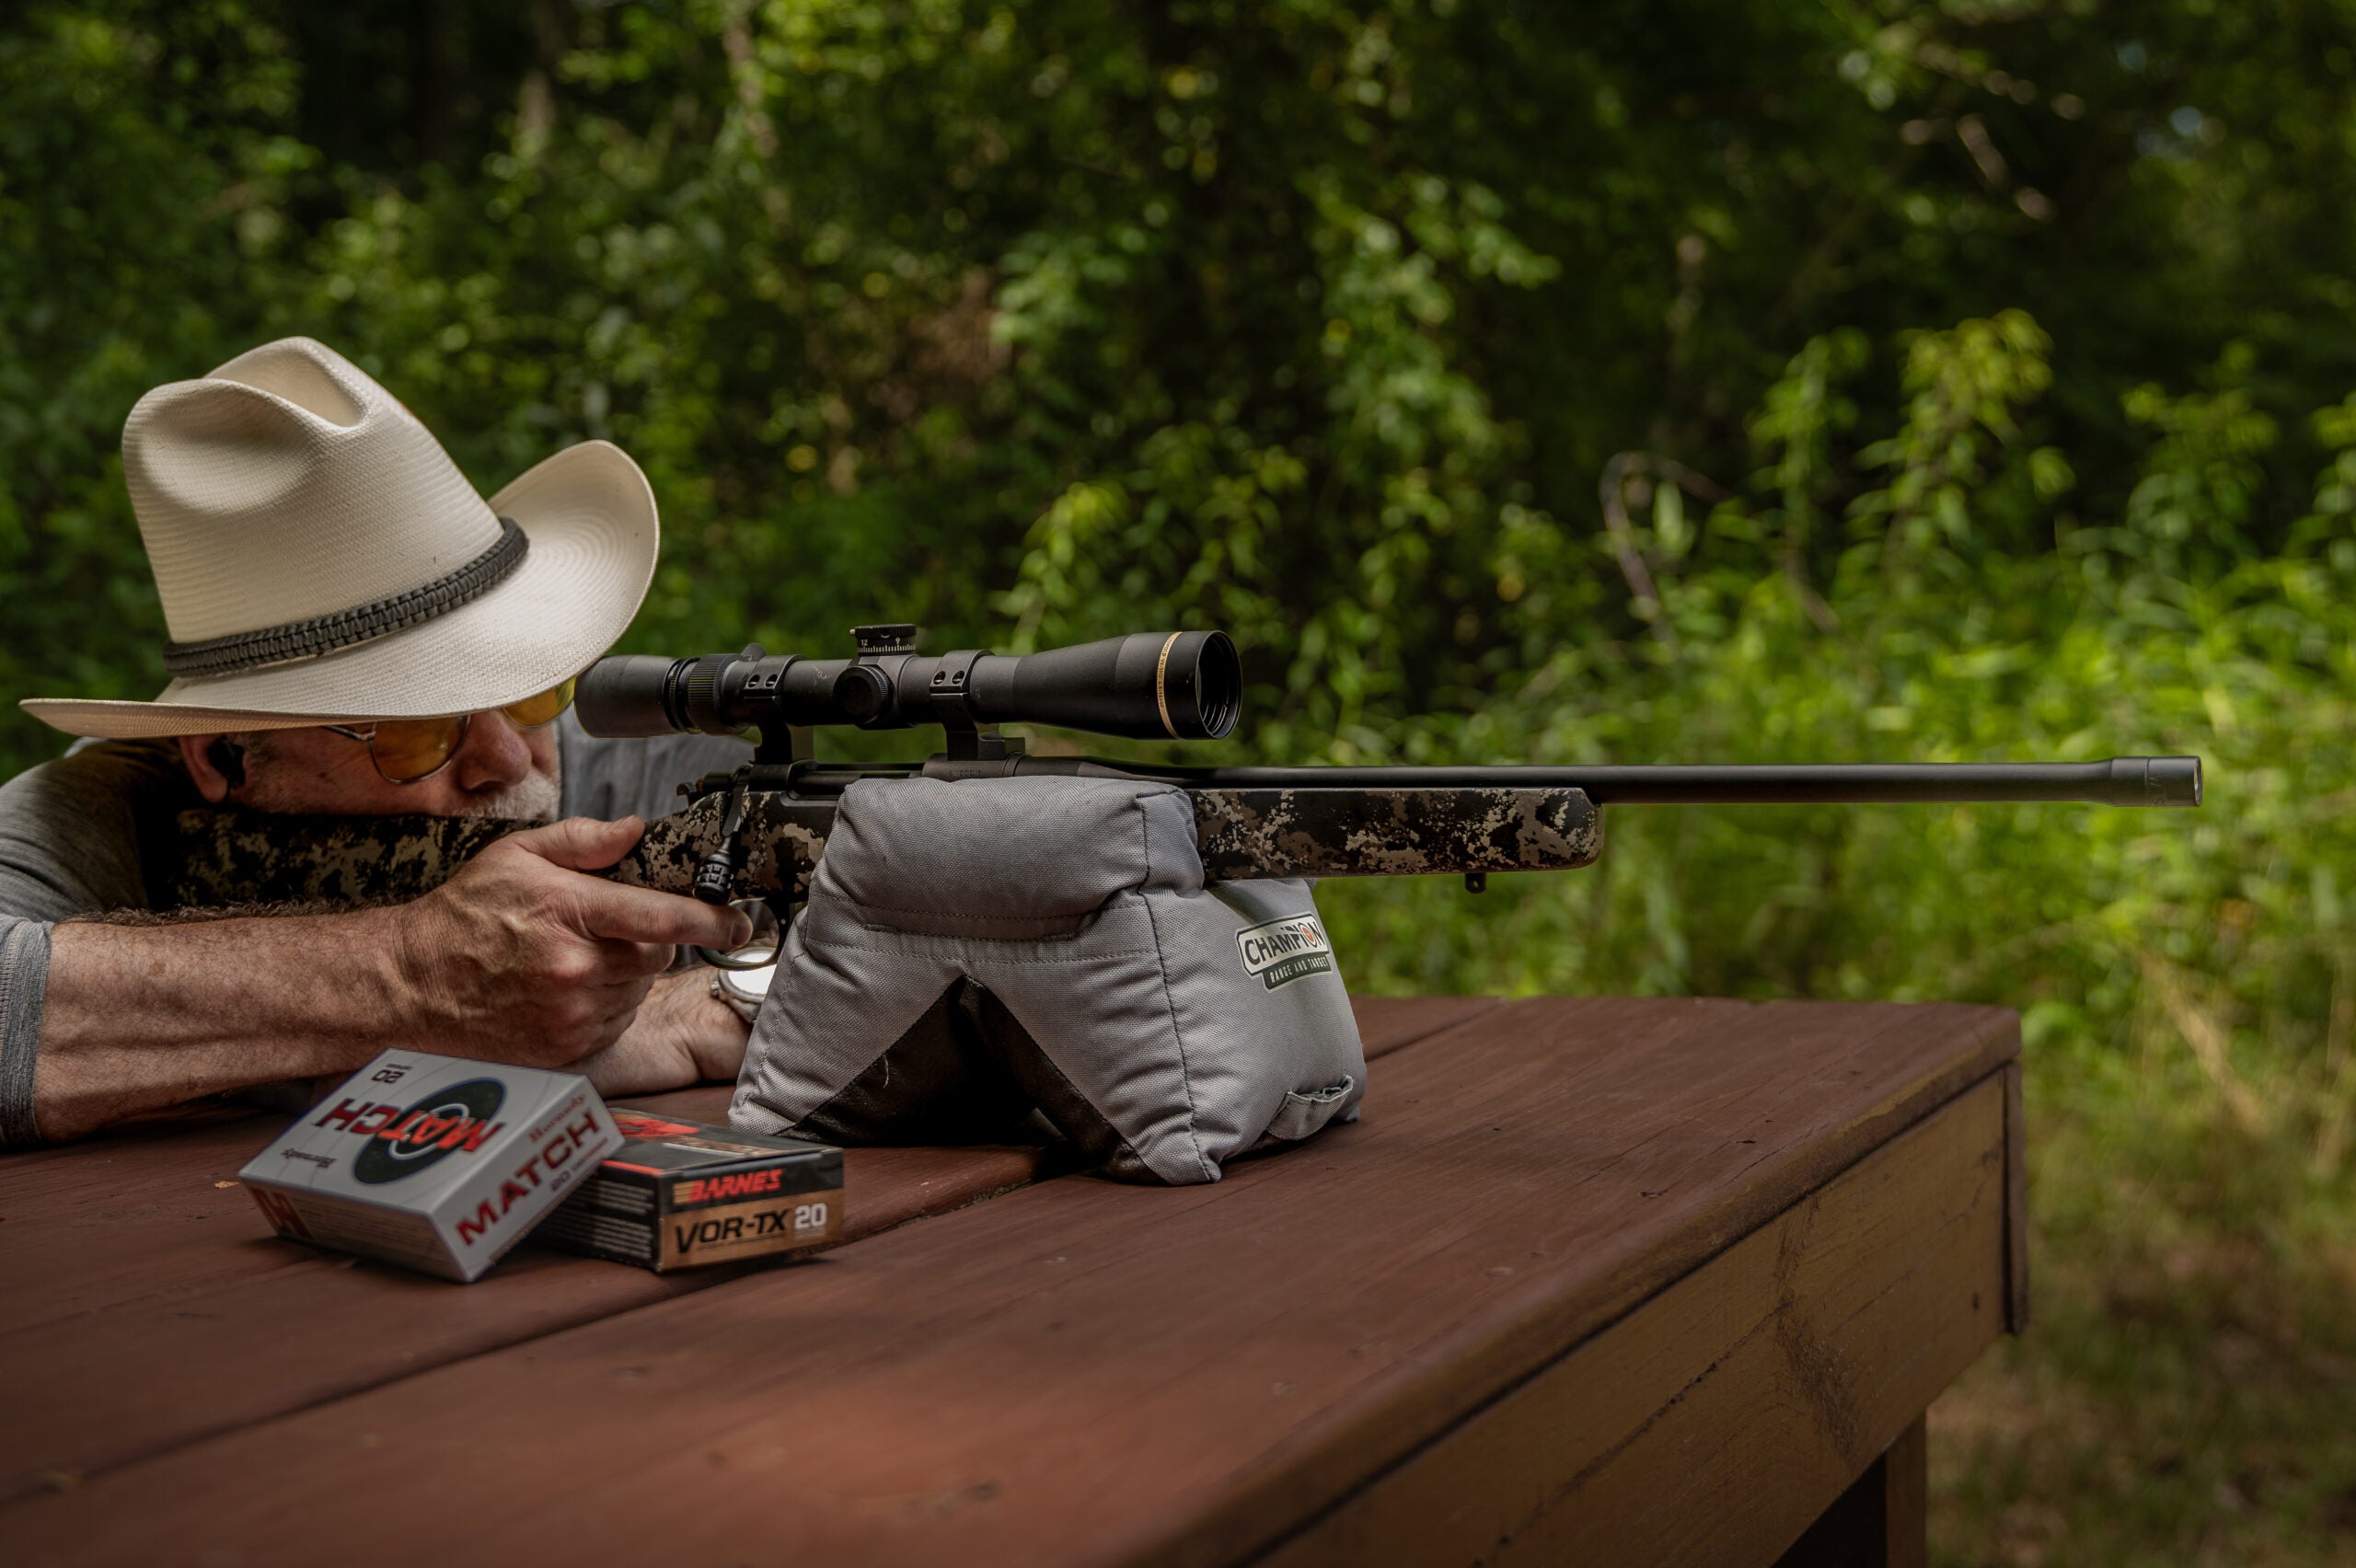 The author shoots a bolt-action rifle chambered in 308 Winchester for a bench rest.